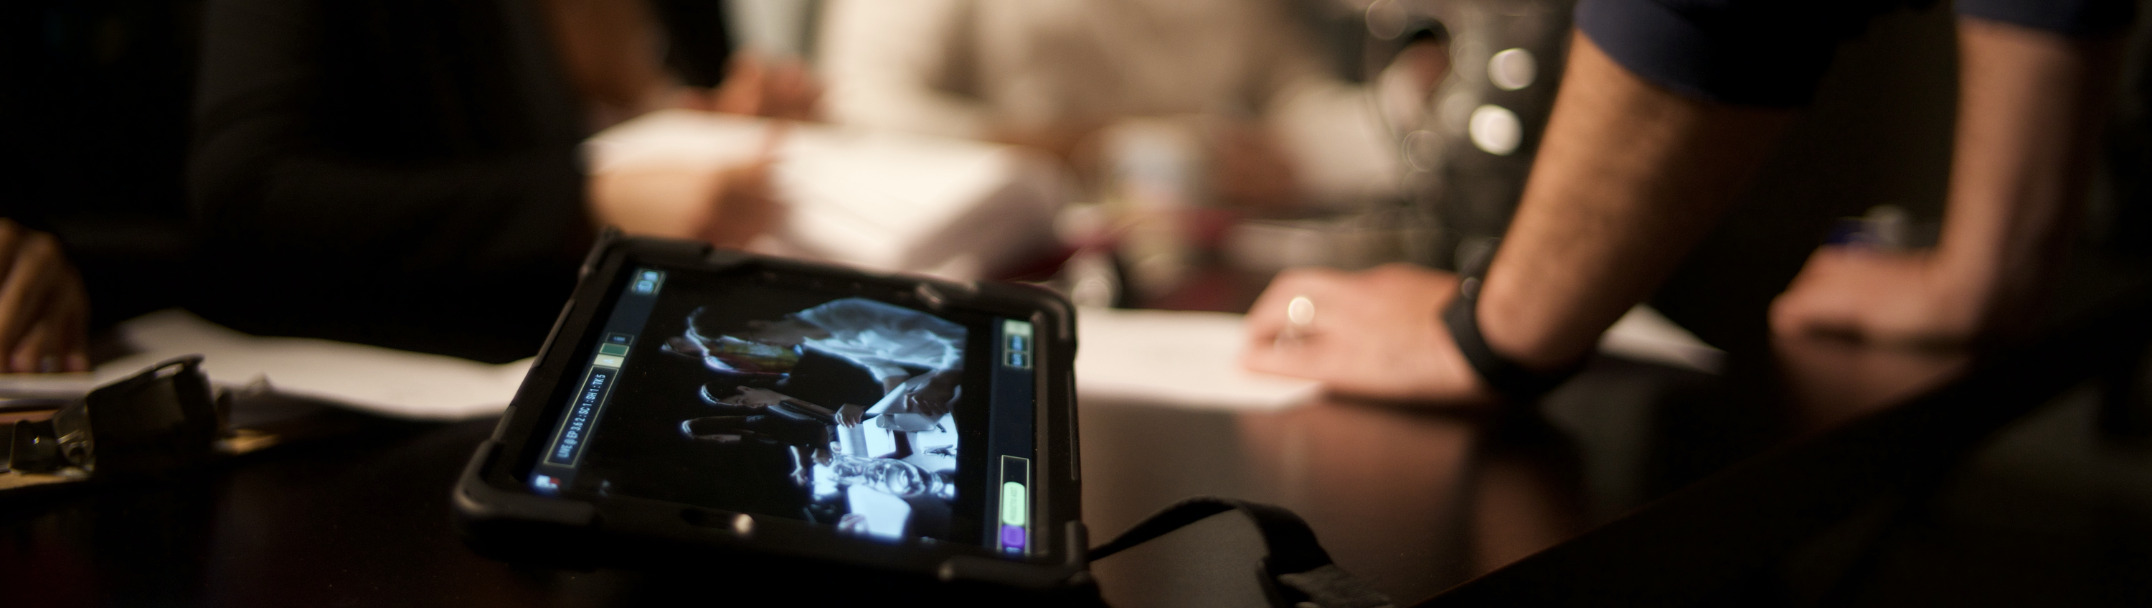 An Onset tablet laying on a desk and crew working in the background